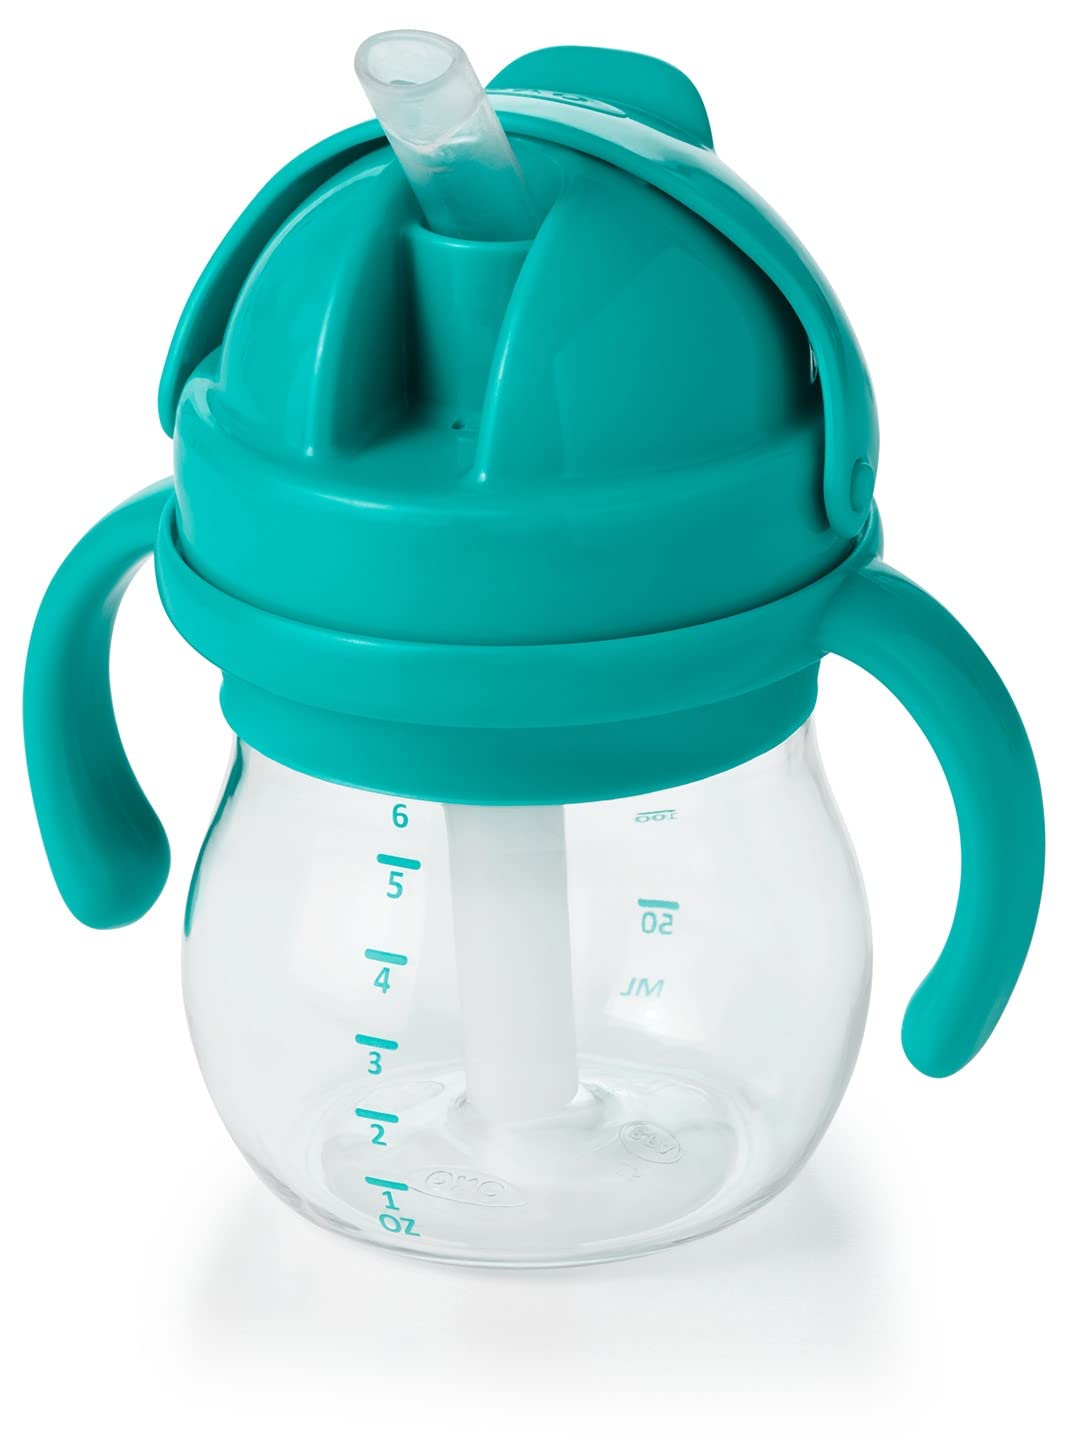 The OXO Tot Transitions Straw Cup with Handles has an almond